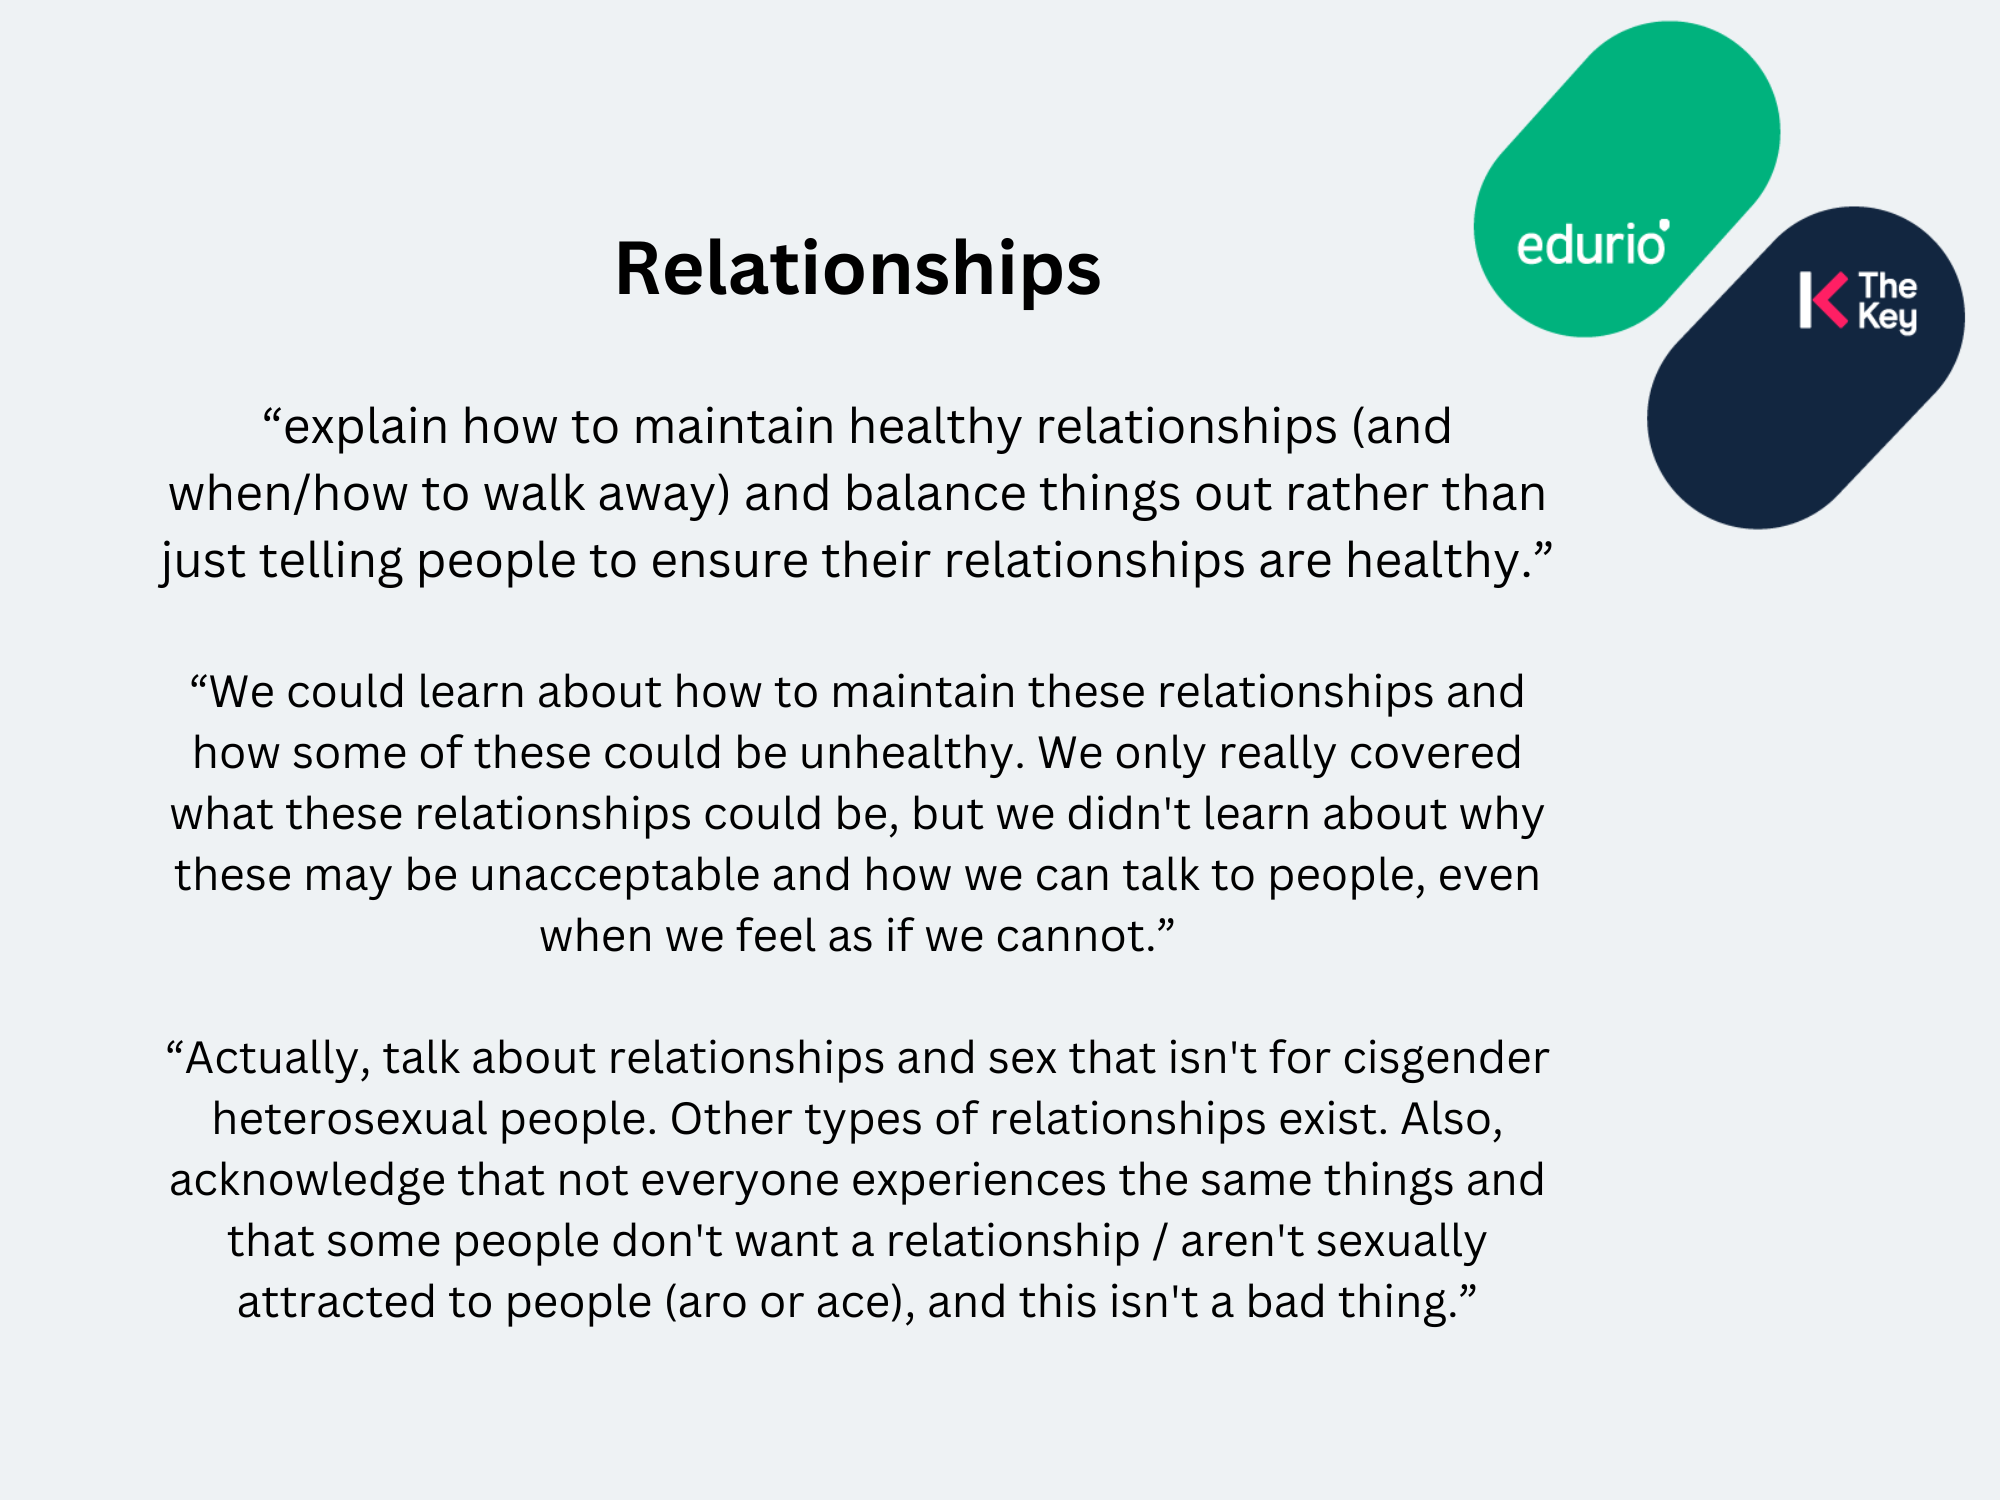 Quotes from pupils about relationships in the RSE curriculum “explain how to maintain healthy relationships (and when/how to walk away) and balance things out rather than just telling people to ensure their relationships are healthy.”
“We could learn about how to maintain these relationships and how some of these could be unhealthy. We only really covered what these relationships could be, but we didn't learn about why these may be unacceptable and how we can talk to people, even when we feel as if we cannot.”
“Actually, talk about relationships and sex that isn't for cisgender heterosexual people. Other types of relationships exist. Also, acknowledge that not everyone experiences the same things and that some people don't want a relationship / aren't sexually attracted to people (aro or ace), and this isn't a bad thing.”
